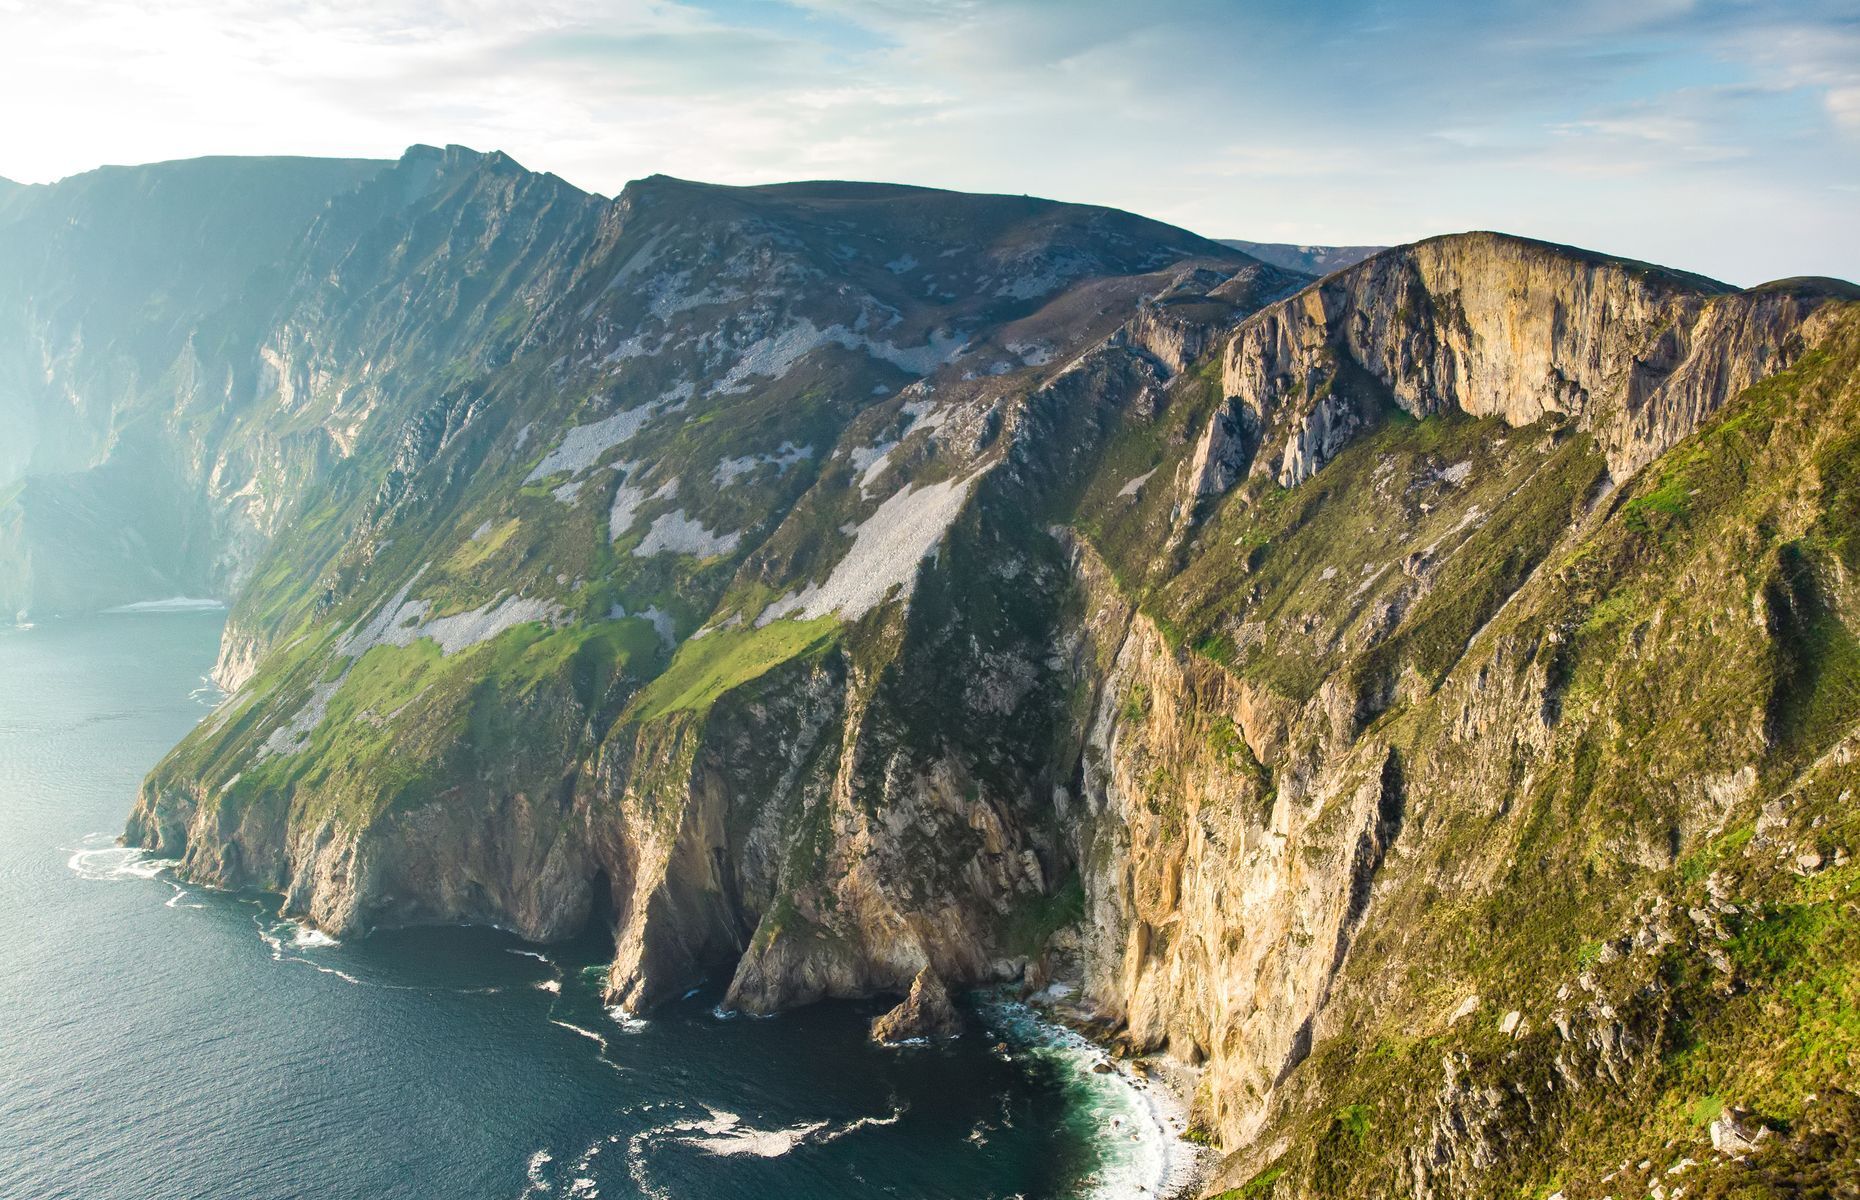 <p>Ranked the second highest in Ireland, the <a href="https://www.ireland.com/en-us/destinations/regions/slieve-league-cliffs/" rel="noreferrer noopener">Slieve</a><a href="https://www.ireland.com/en-us/destinations/regions/slieve-league-cliffs/" rel="noreferrer noopener"> League Cliffs</a> are three times taller than those of Moher. Located in County Donegal, Slieve League is best seen from One Man’s Pass, where you’ll feel like you’re walking in the clouds by the sea side.</p>